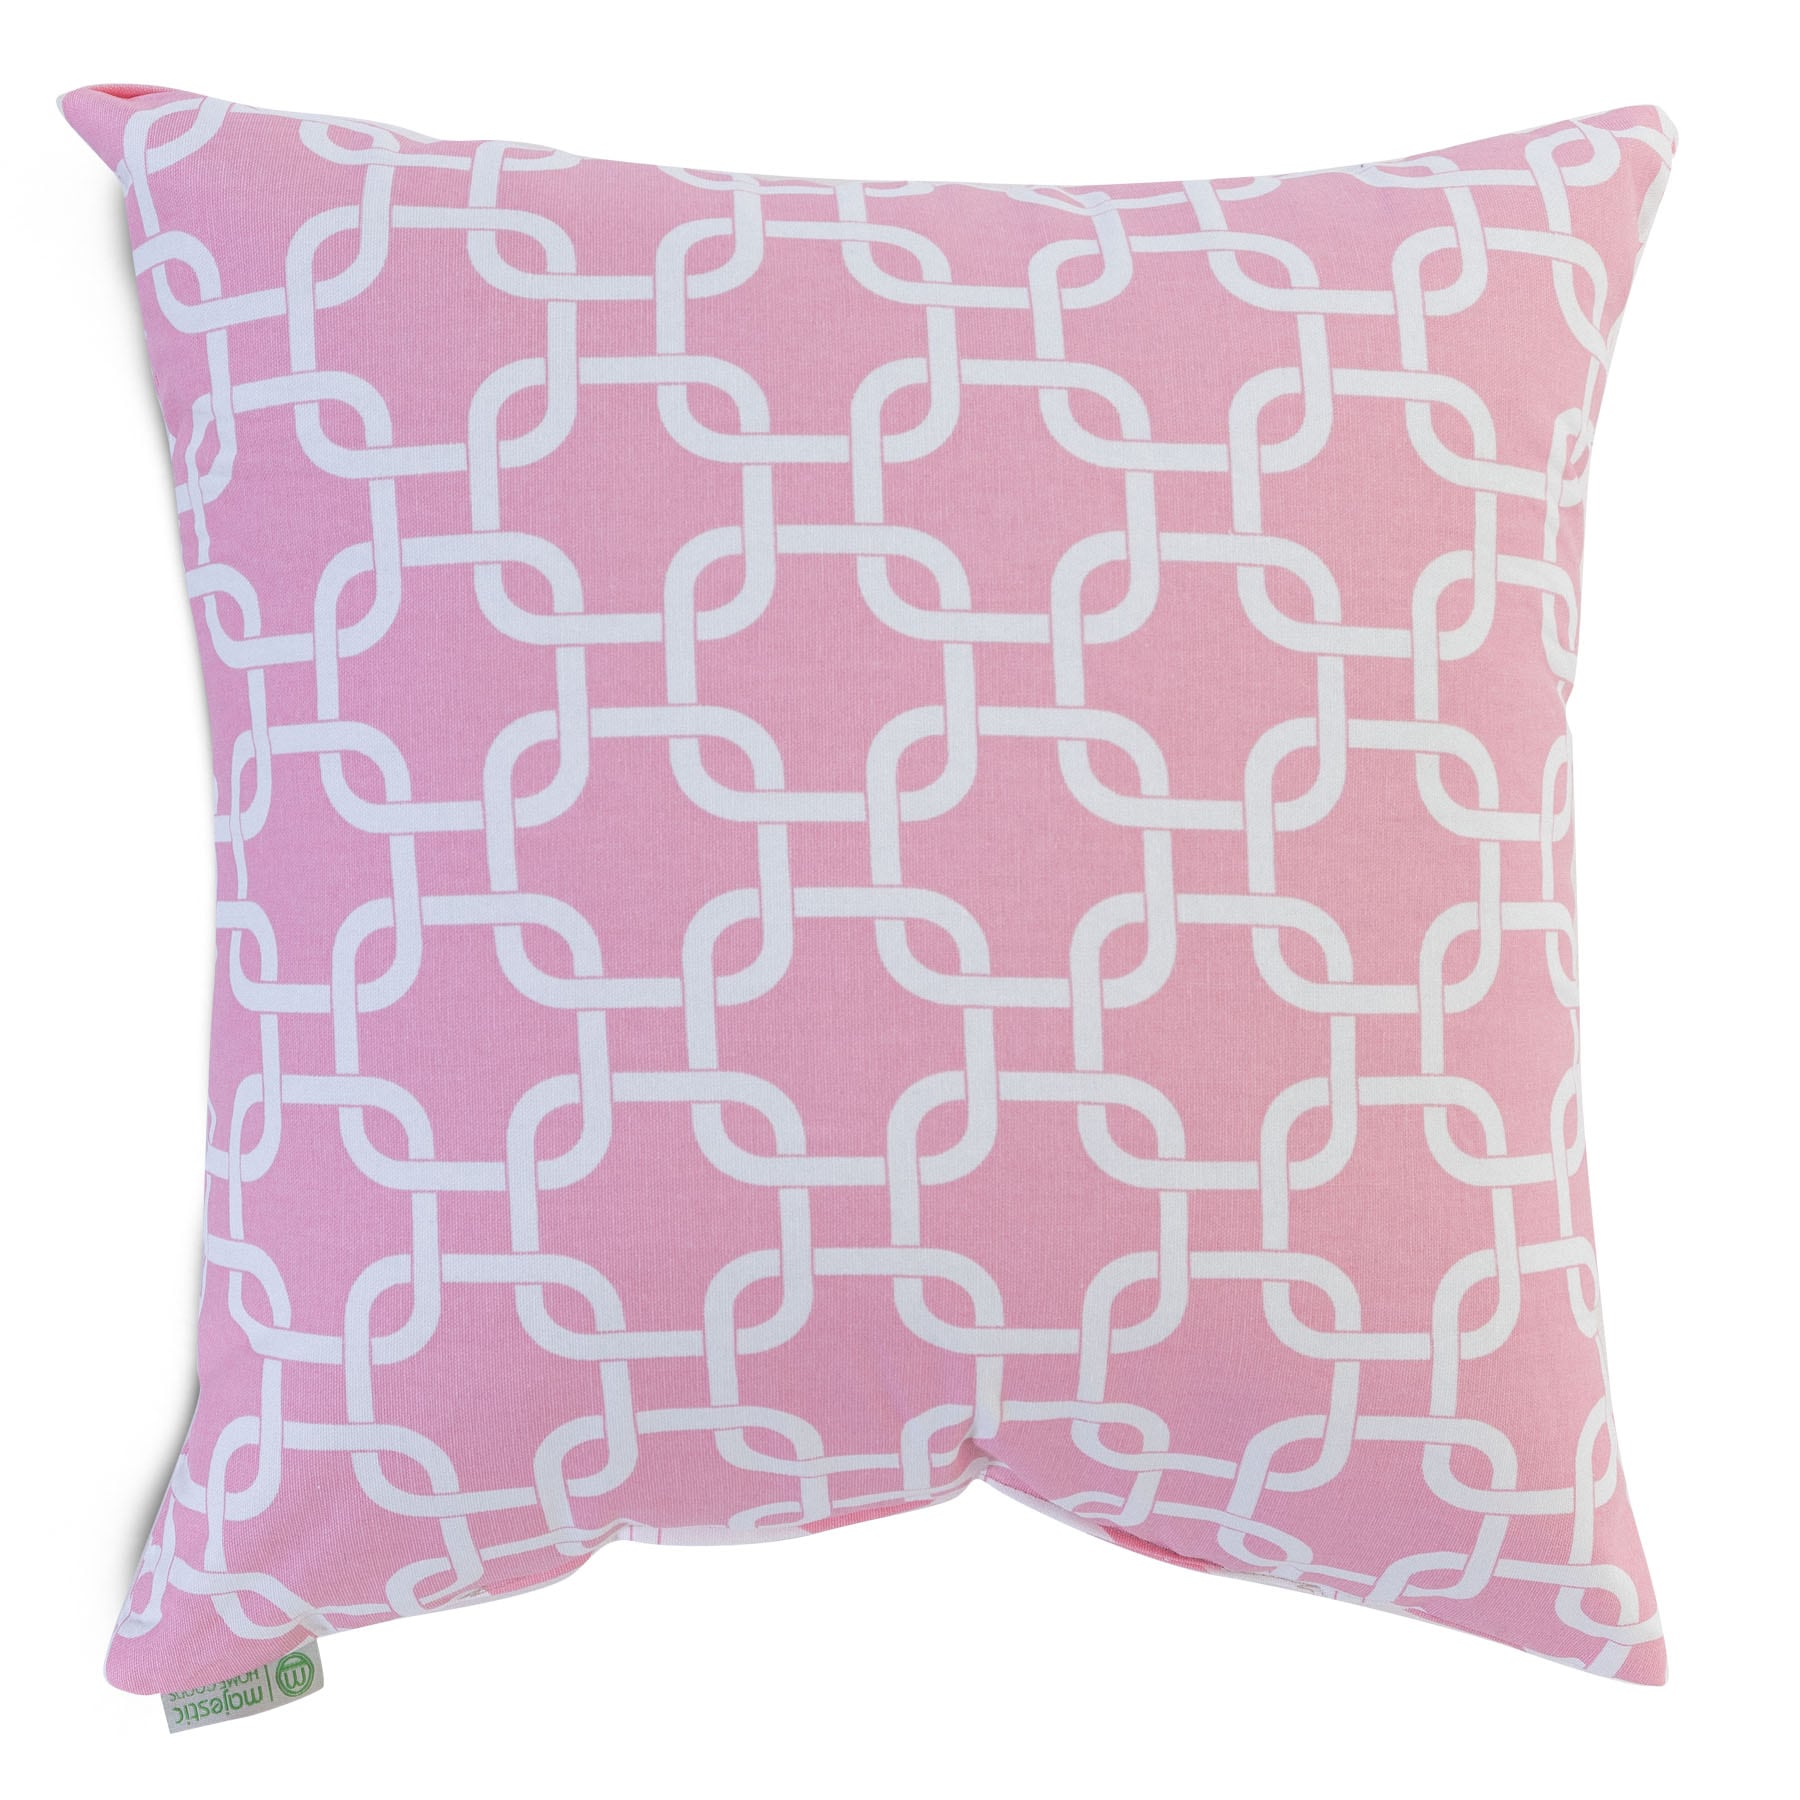 Coral Small Pillow – Majestic Home Goods